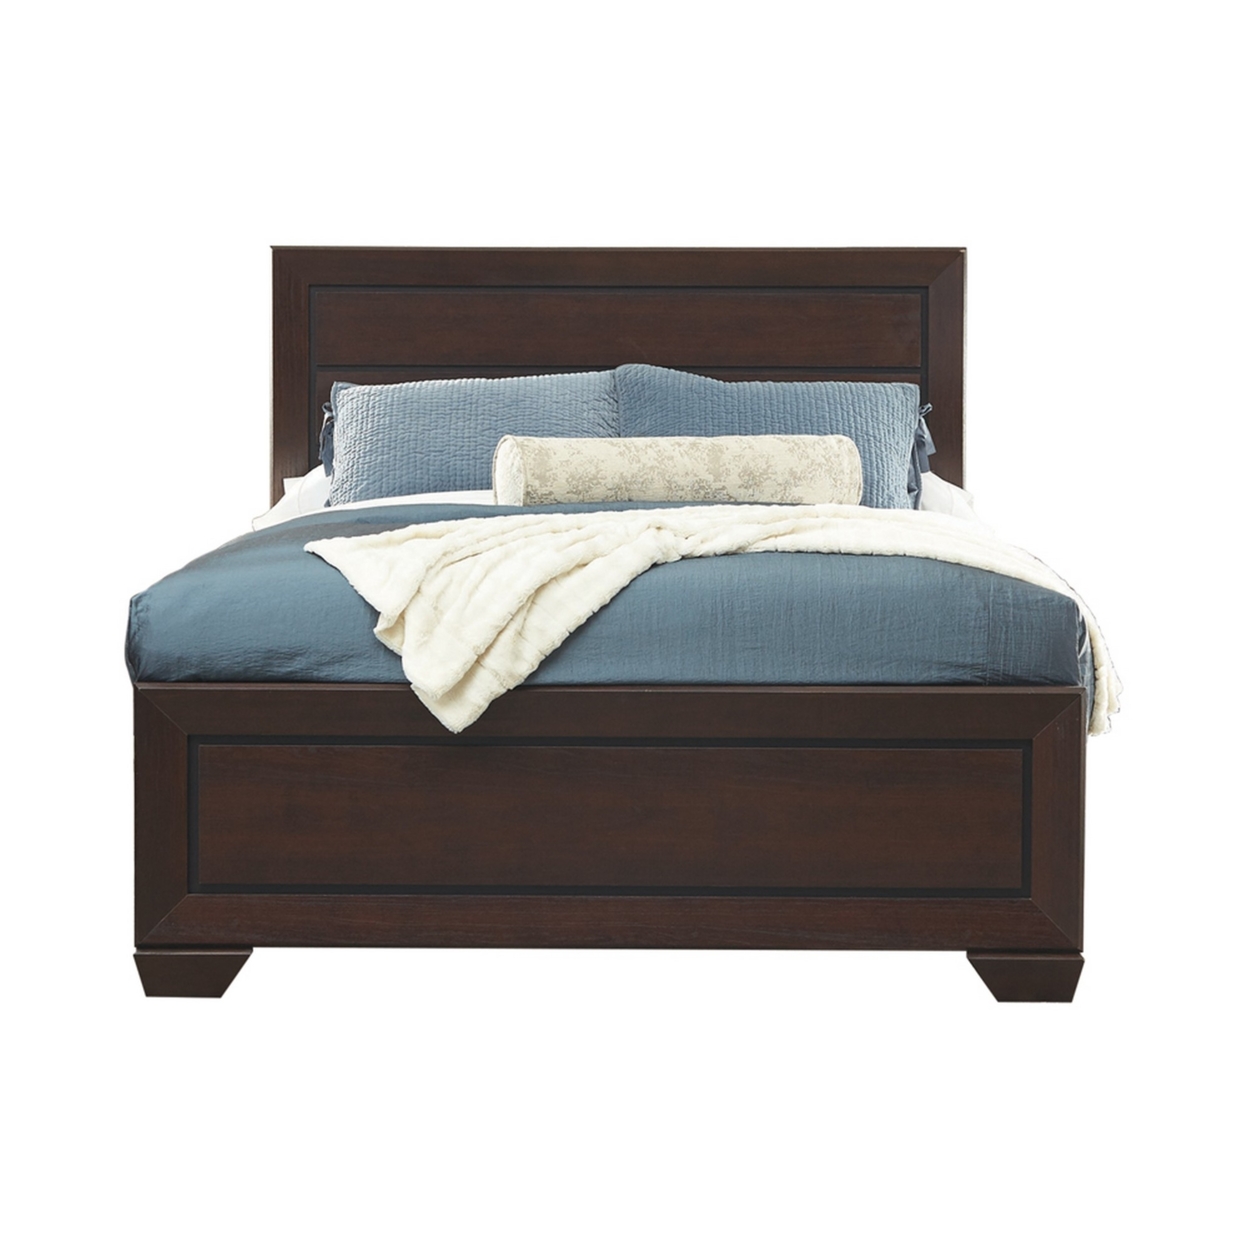 Queen Size Bed With Panel Headboard And Footboard, Cocoa Brown- Saltoro Sherpi